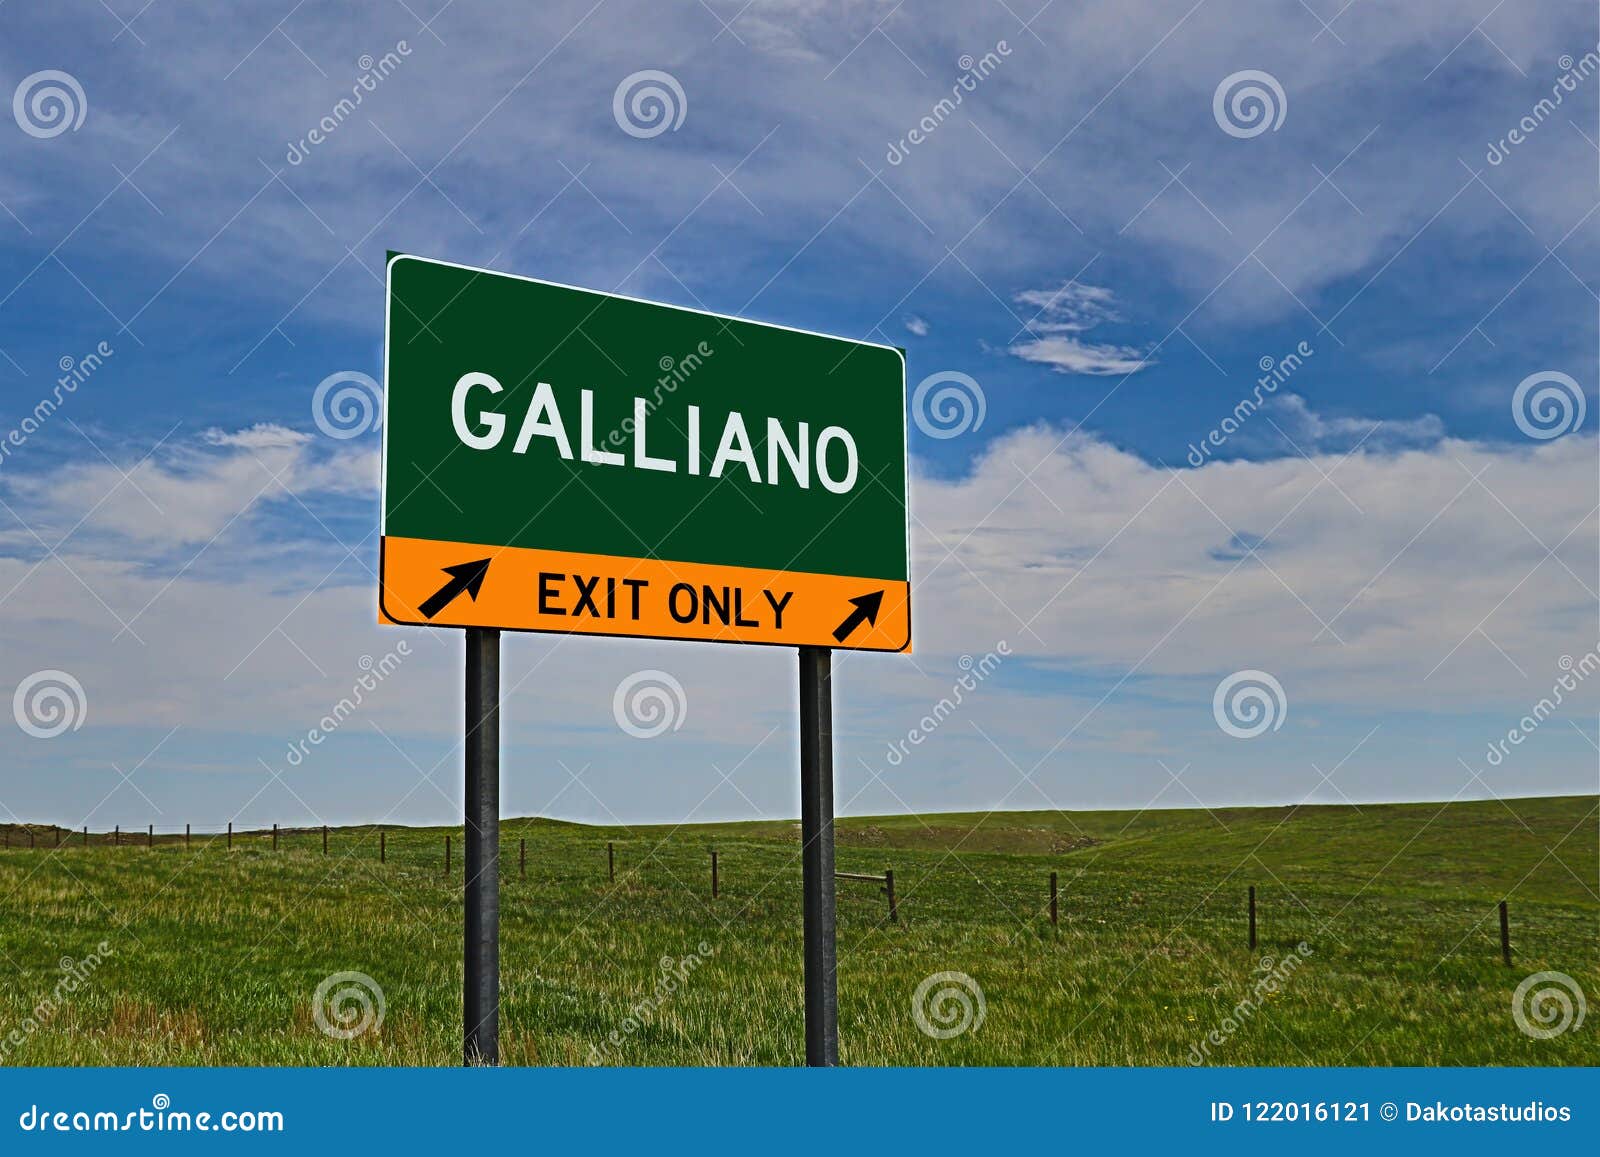 us highway exit sign for galliano